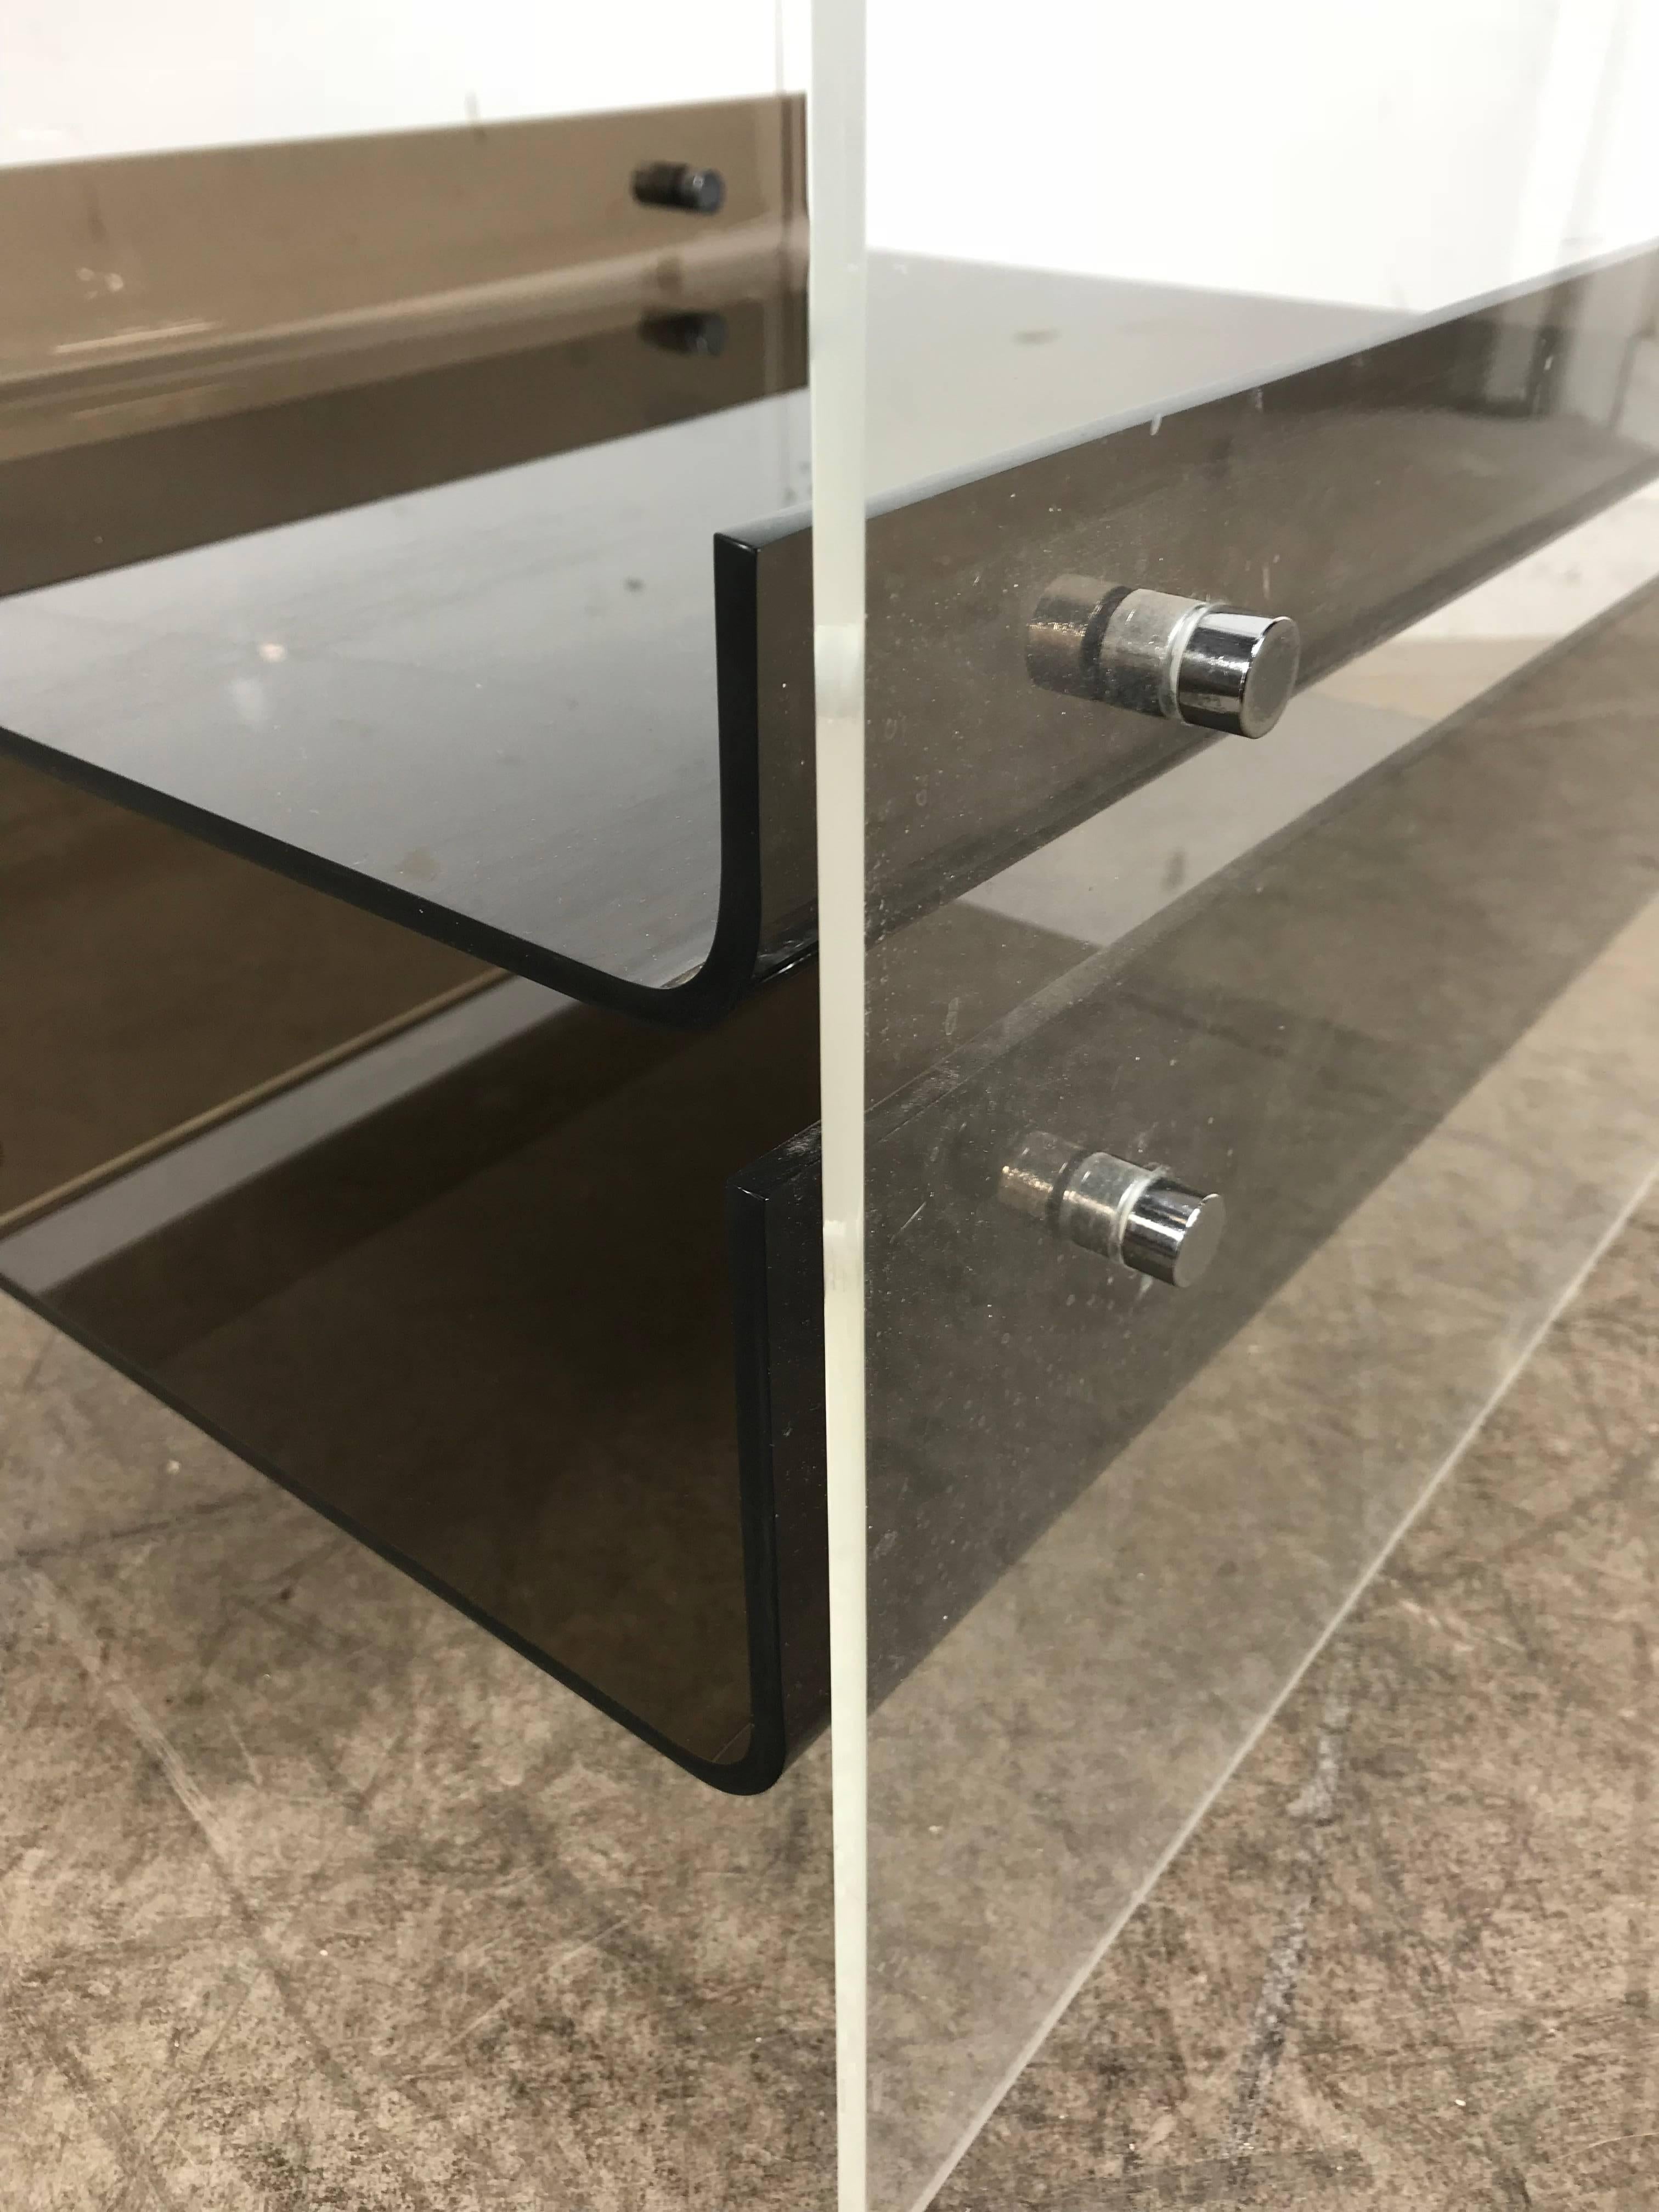 This acrylic side table with its striking Minimalist look is attributed to Neal Small, using the same chrome hardware seen on his other designs, transparent table made from a single piece of acrylic with a pair of upturned smoke shelves.